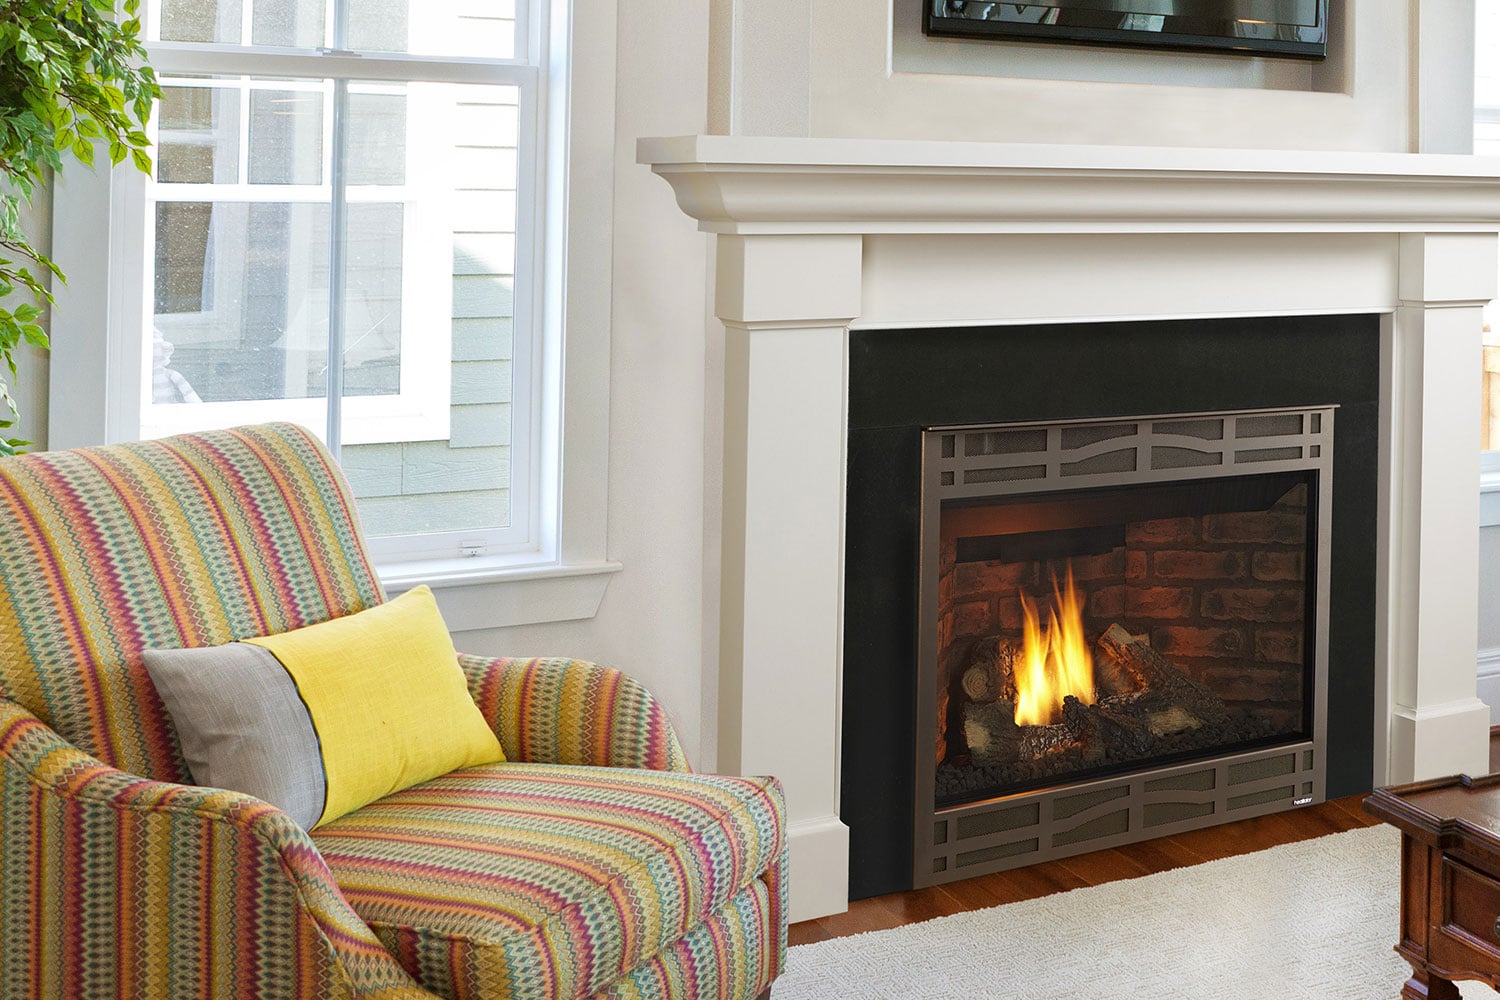 Novus gas fireplace with in living room with colorful chair